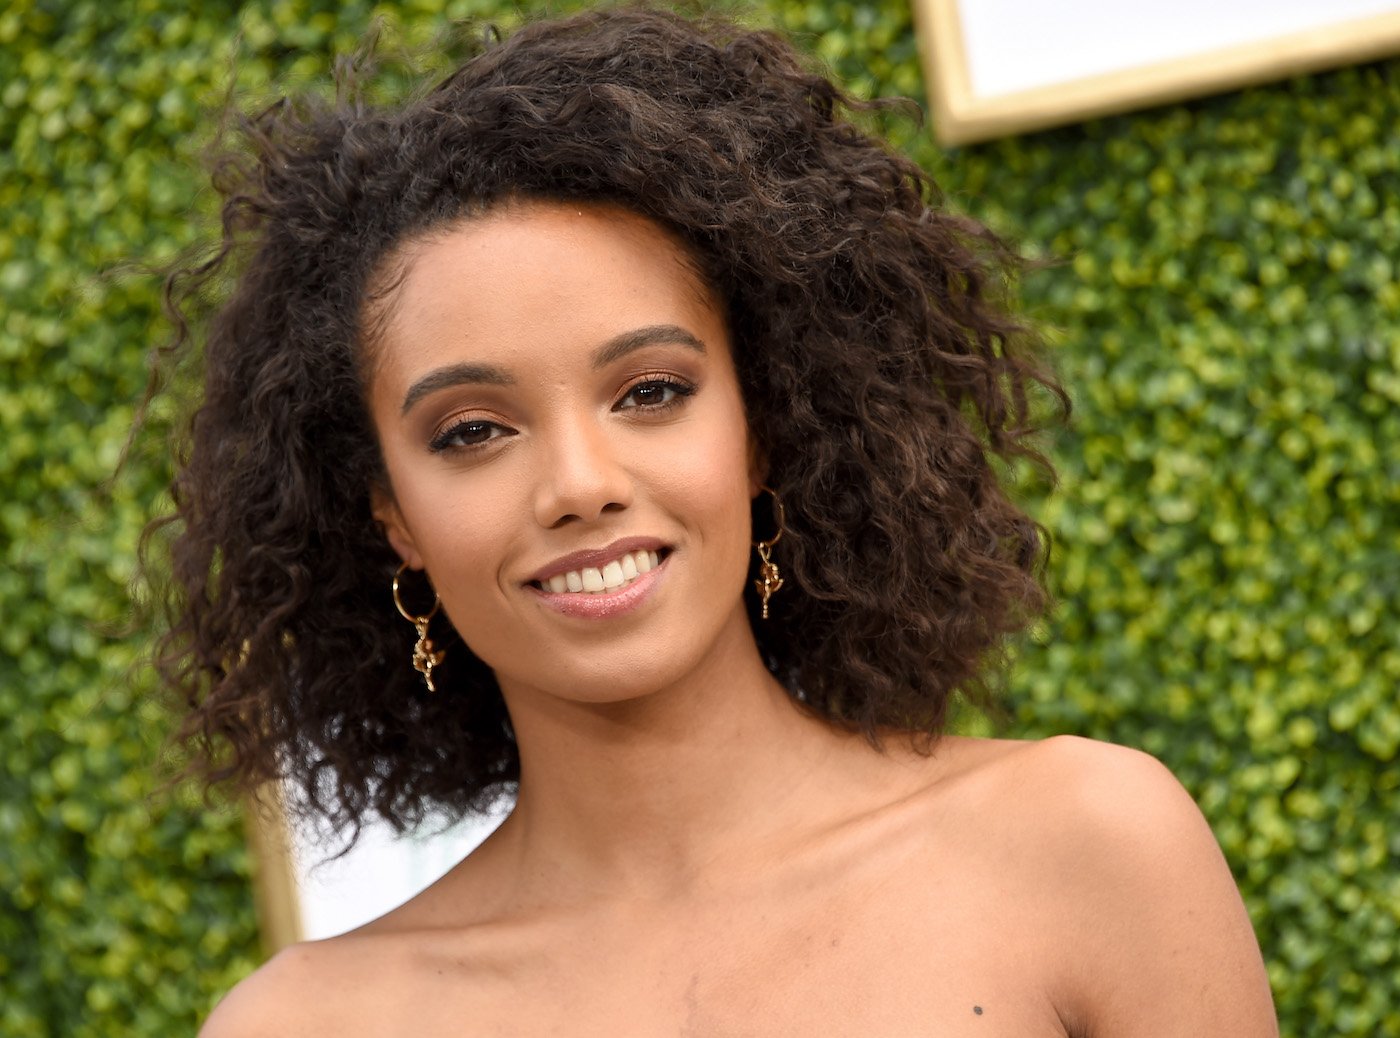 Maisie Richardson-Sellers arrives at The CW Network's Fall Launch Event at Warner Bros. Studios in October 2018 in Burbank, California